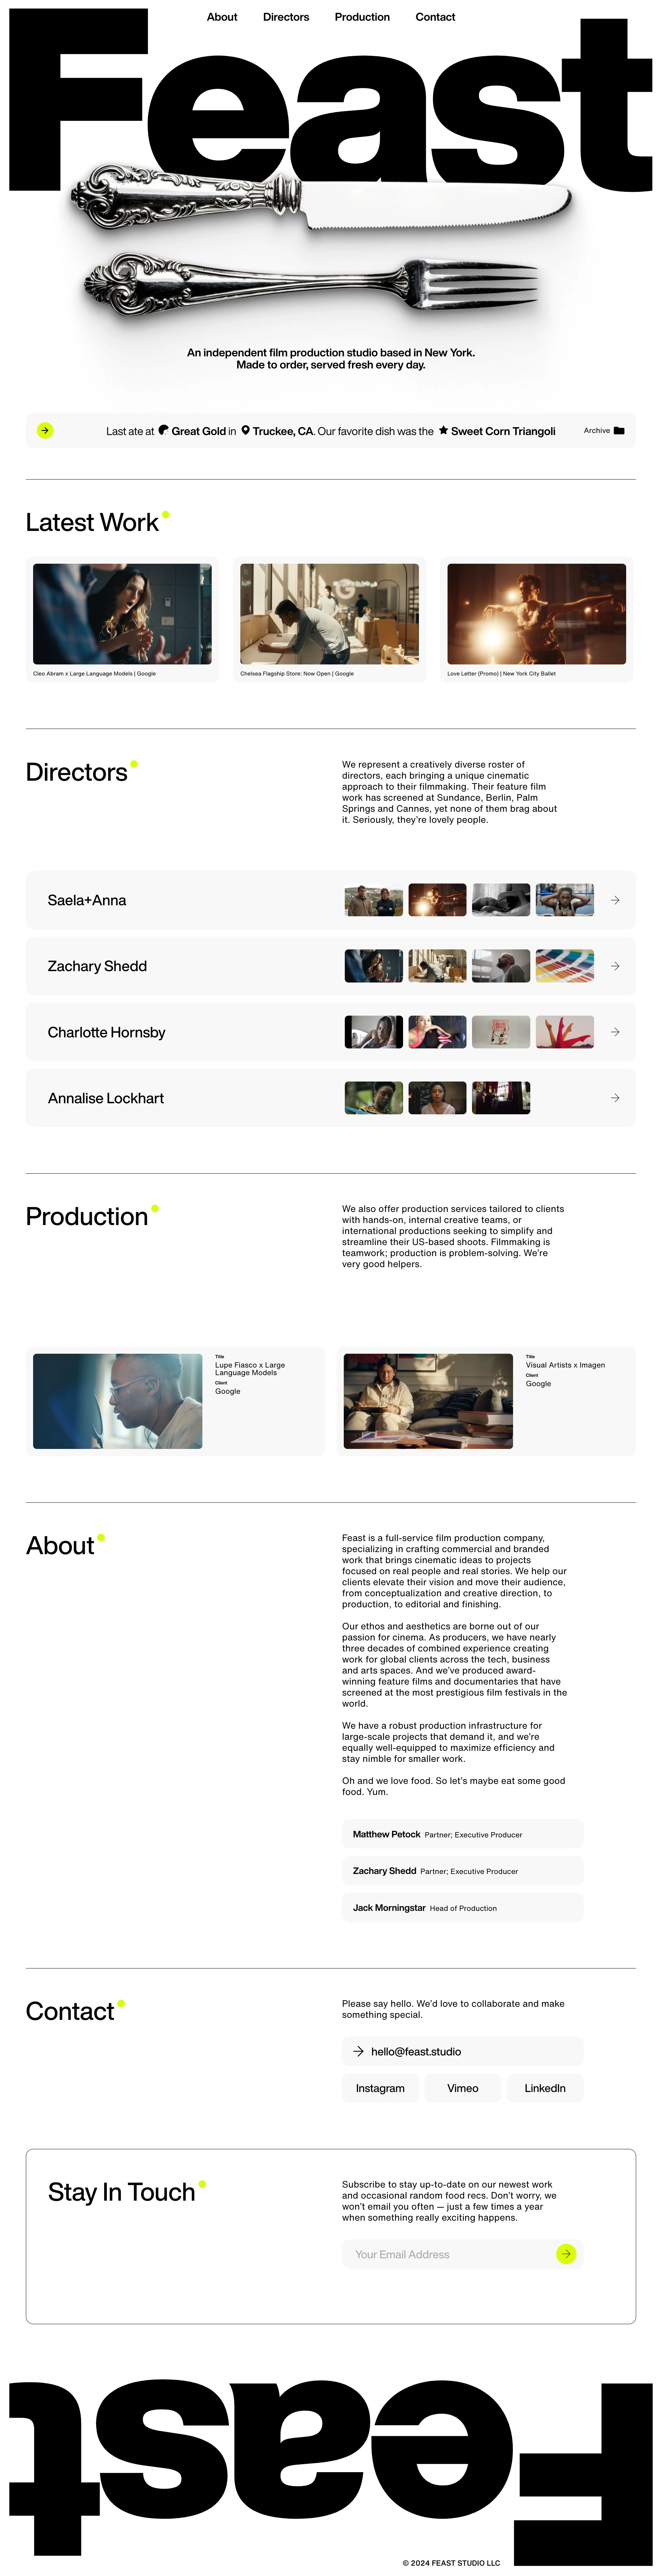 Feast Studio Landing Page Example: An independent film production studio based in New York. Made to order, served fresh every day.